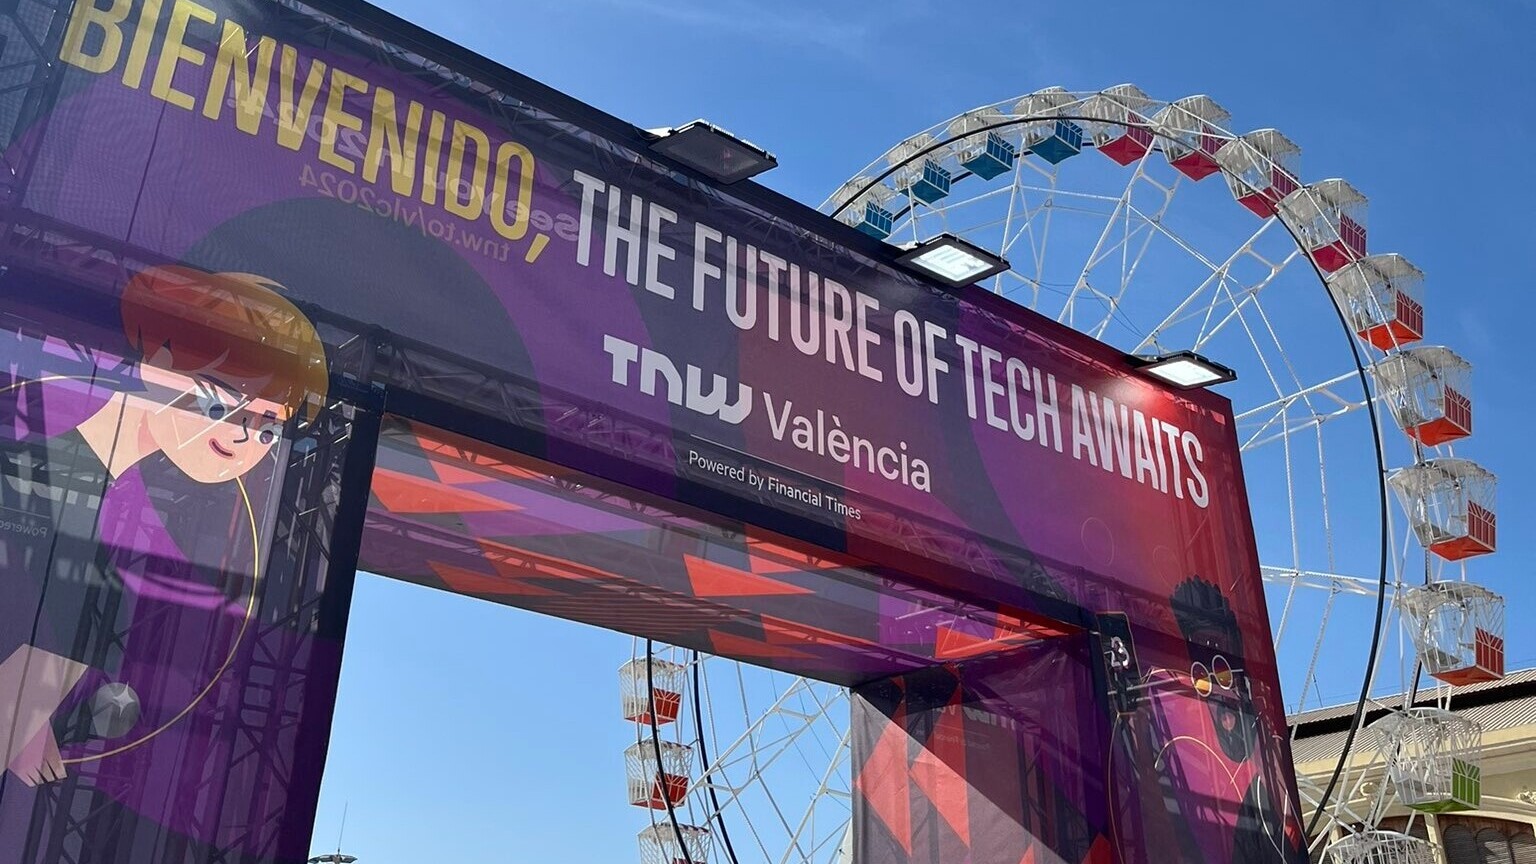 TNW València has arrived! Here are some highlights from Day 1  